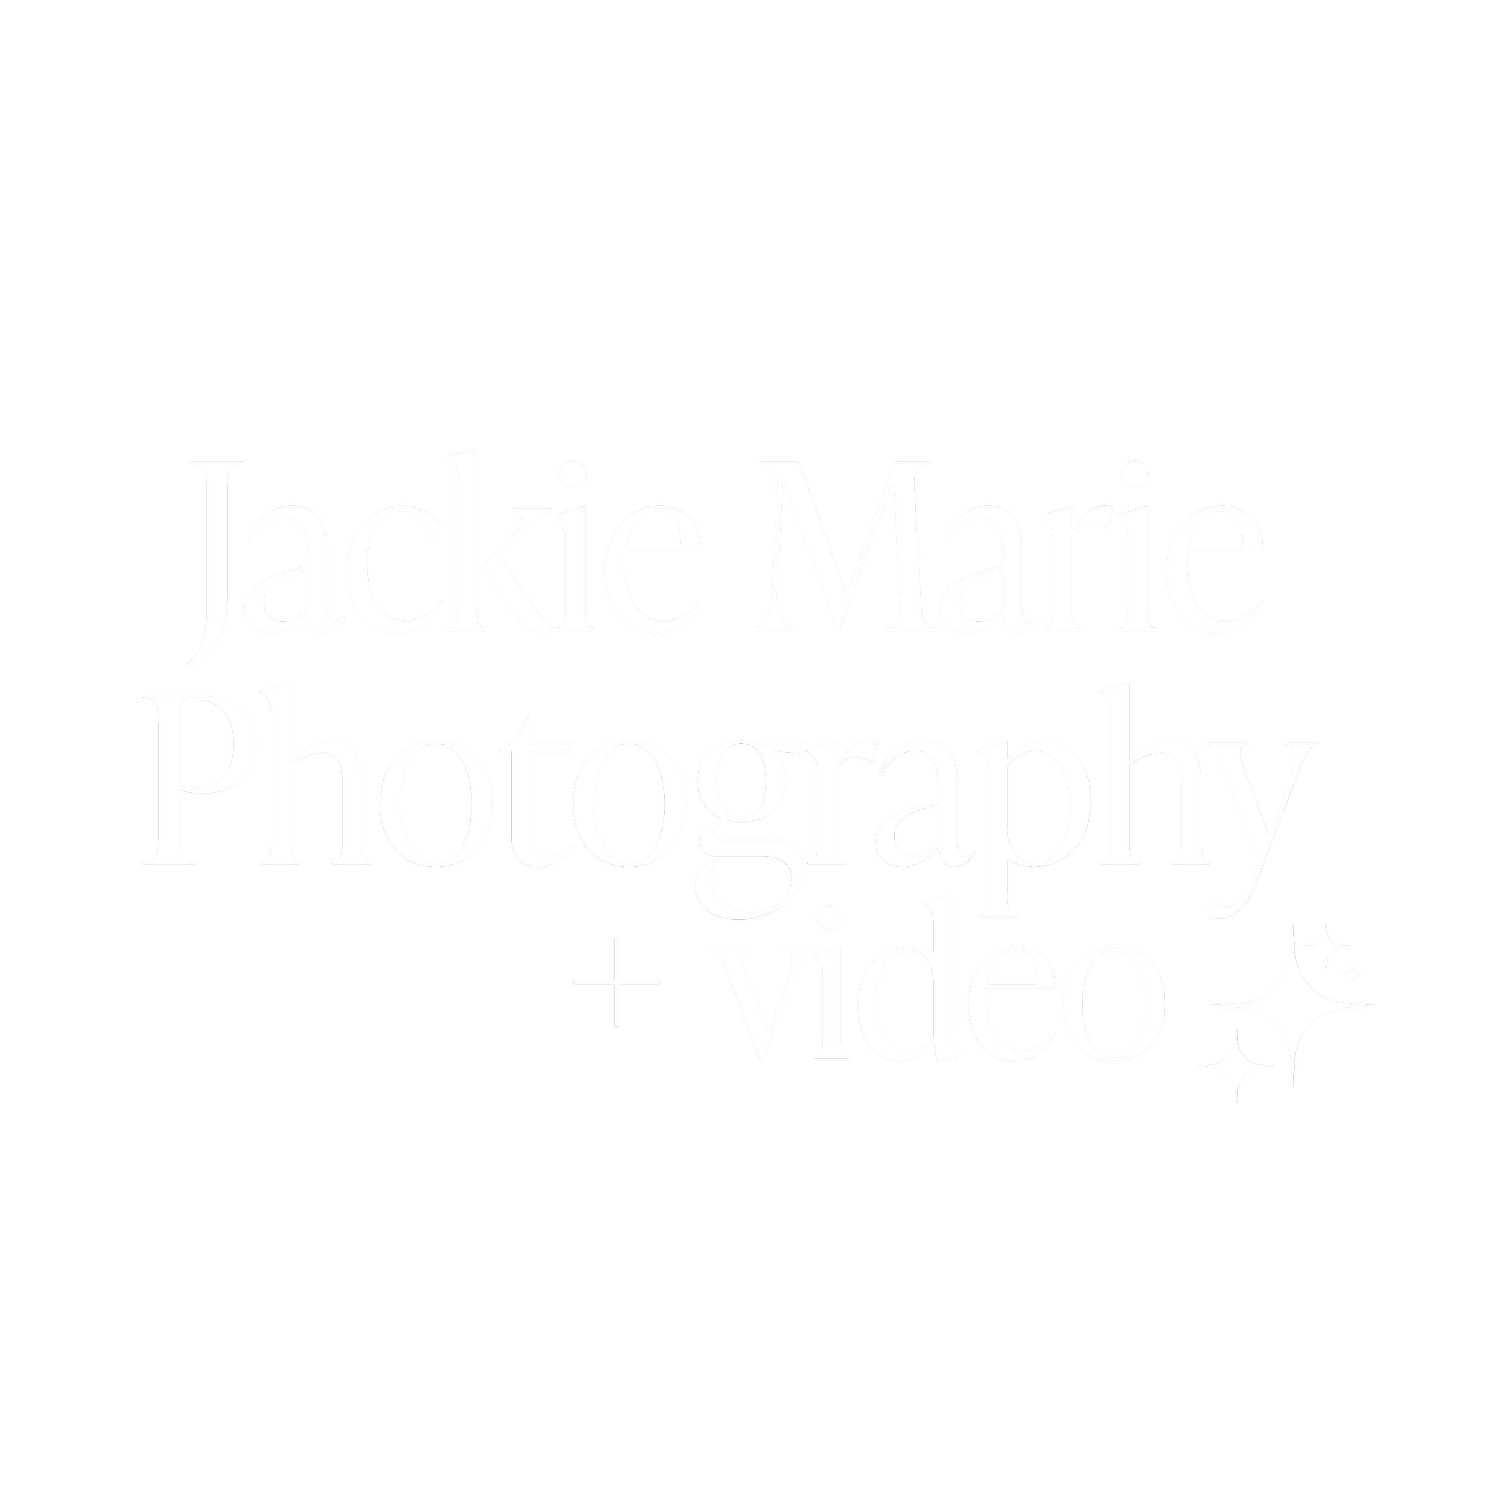 JACKIE MARIE PHOTOGRAPHY